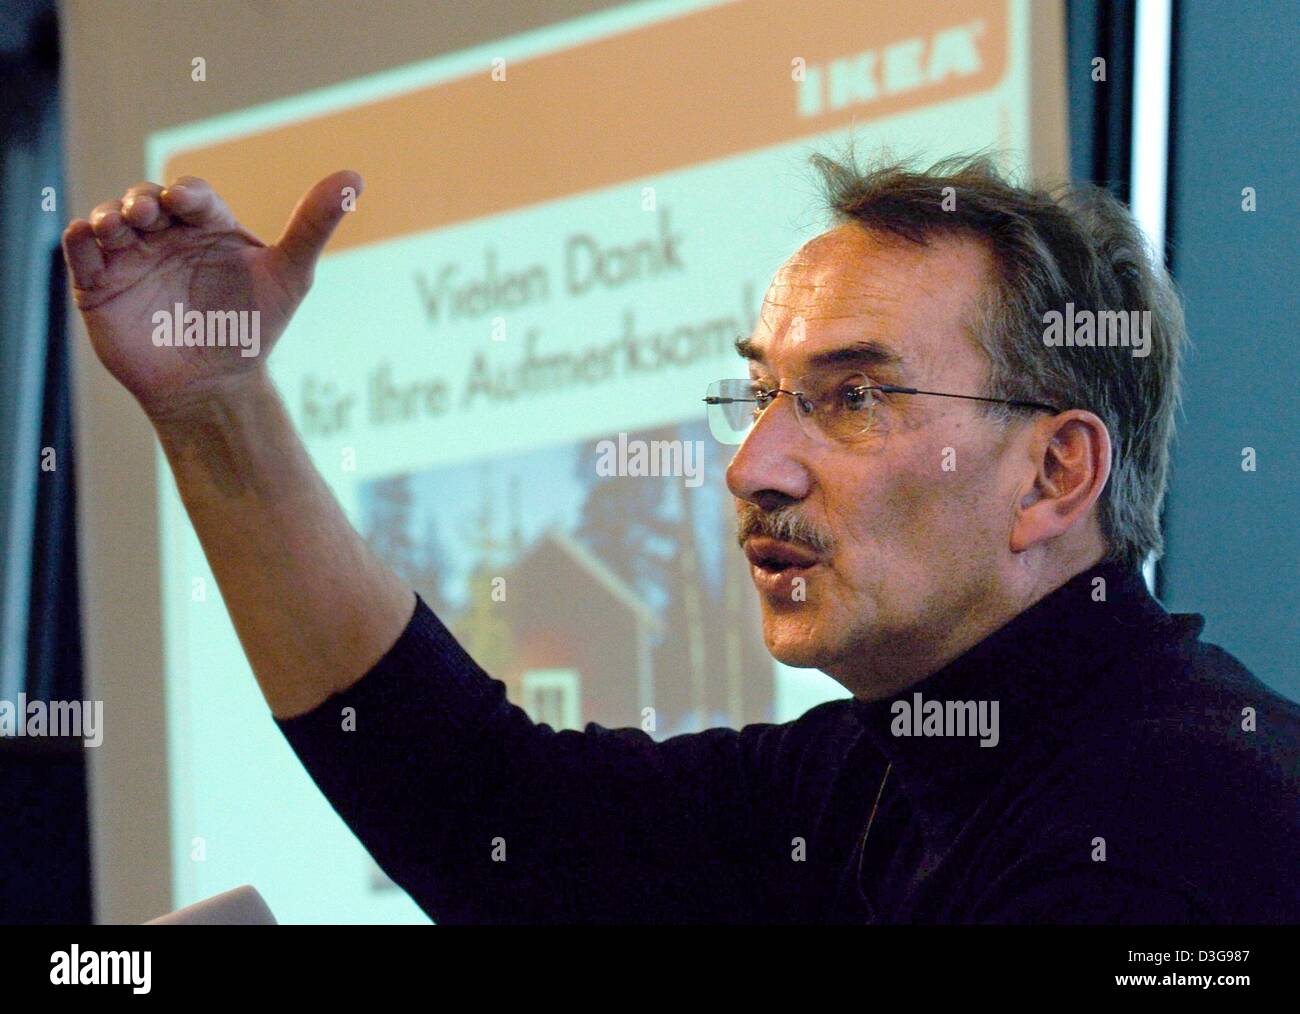 dpa) - Werner Weber, Chairman of Ikea Deutschland, speaks during the  company's balance press conference in Frankfurt, Germany, 16 November 2004.  The Swedish furniture supplier in Germany increased its business figures  despite